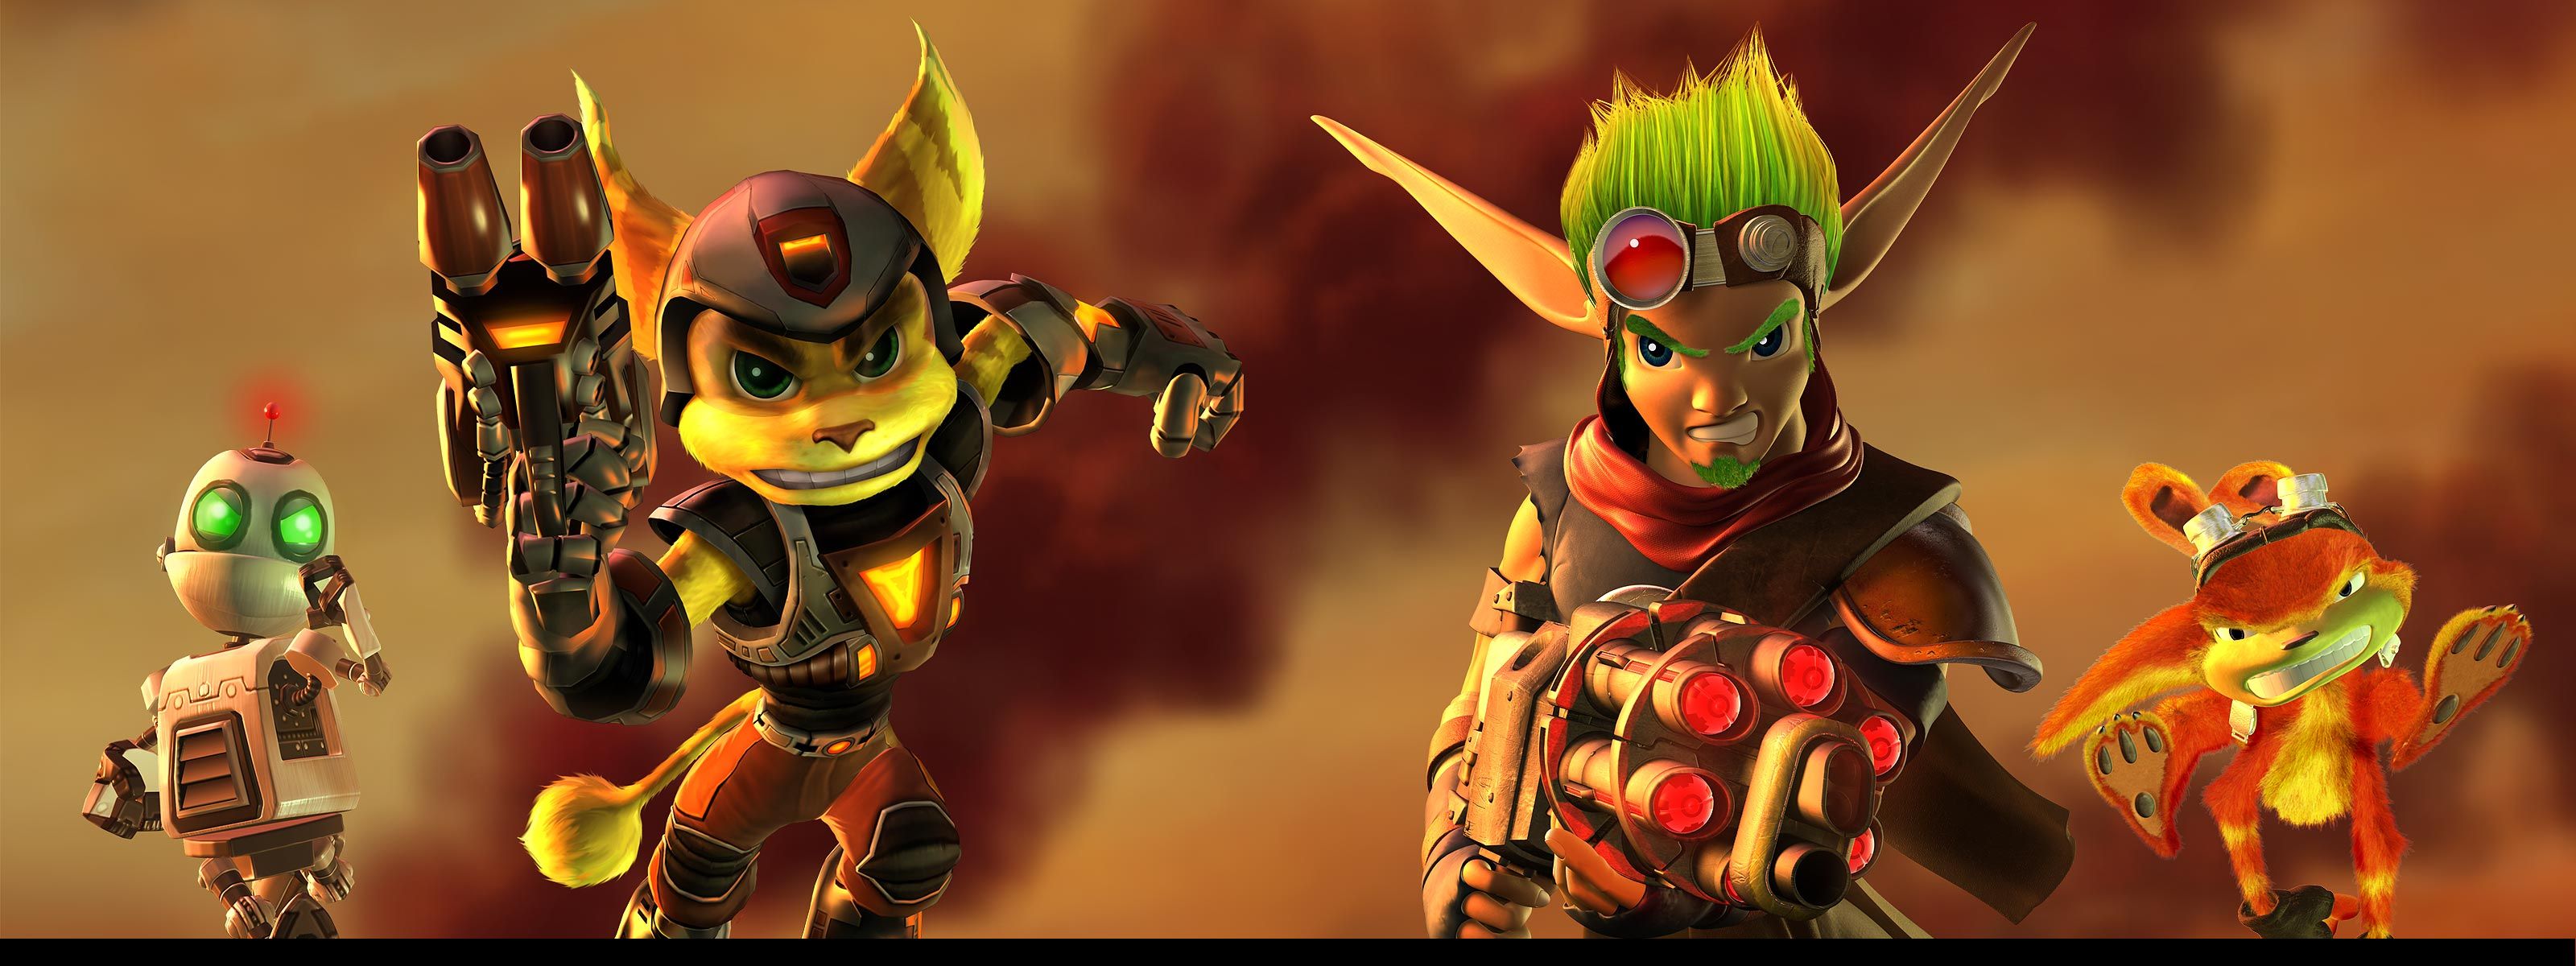 video game, ratchet & clank